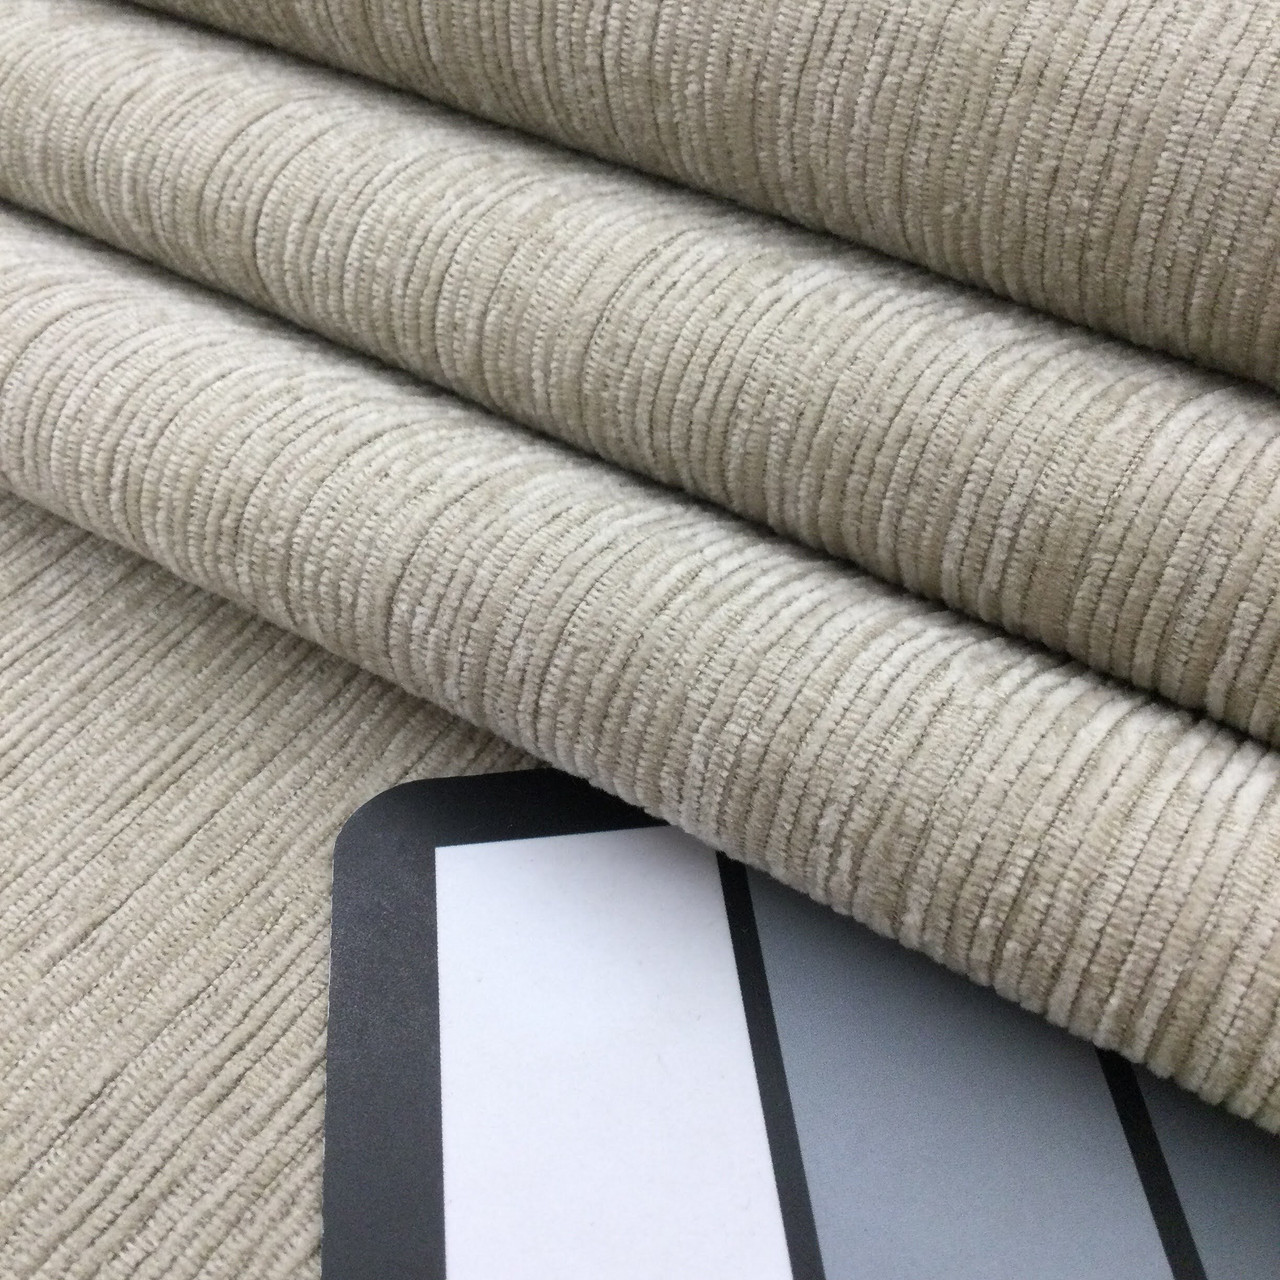 Dark Beige Brushed Chenille, Upholstery Fabric, 59 Wide